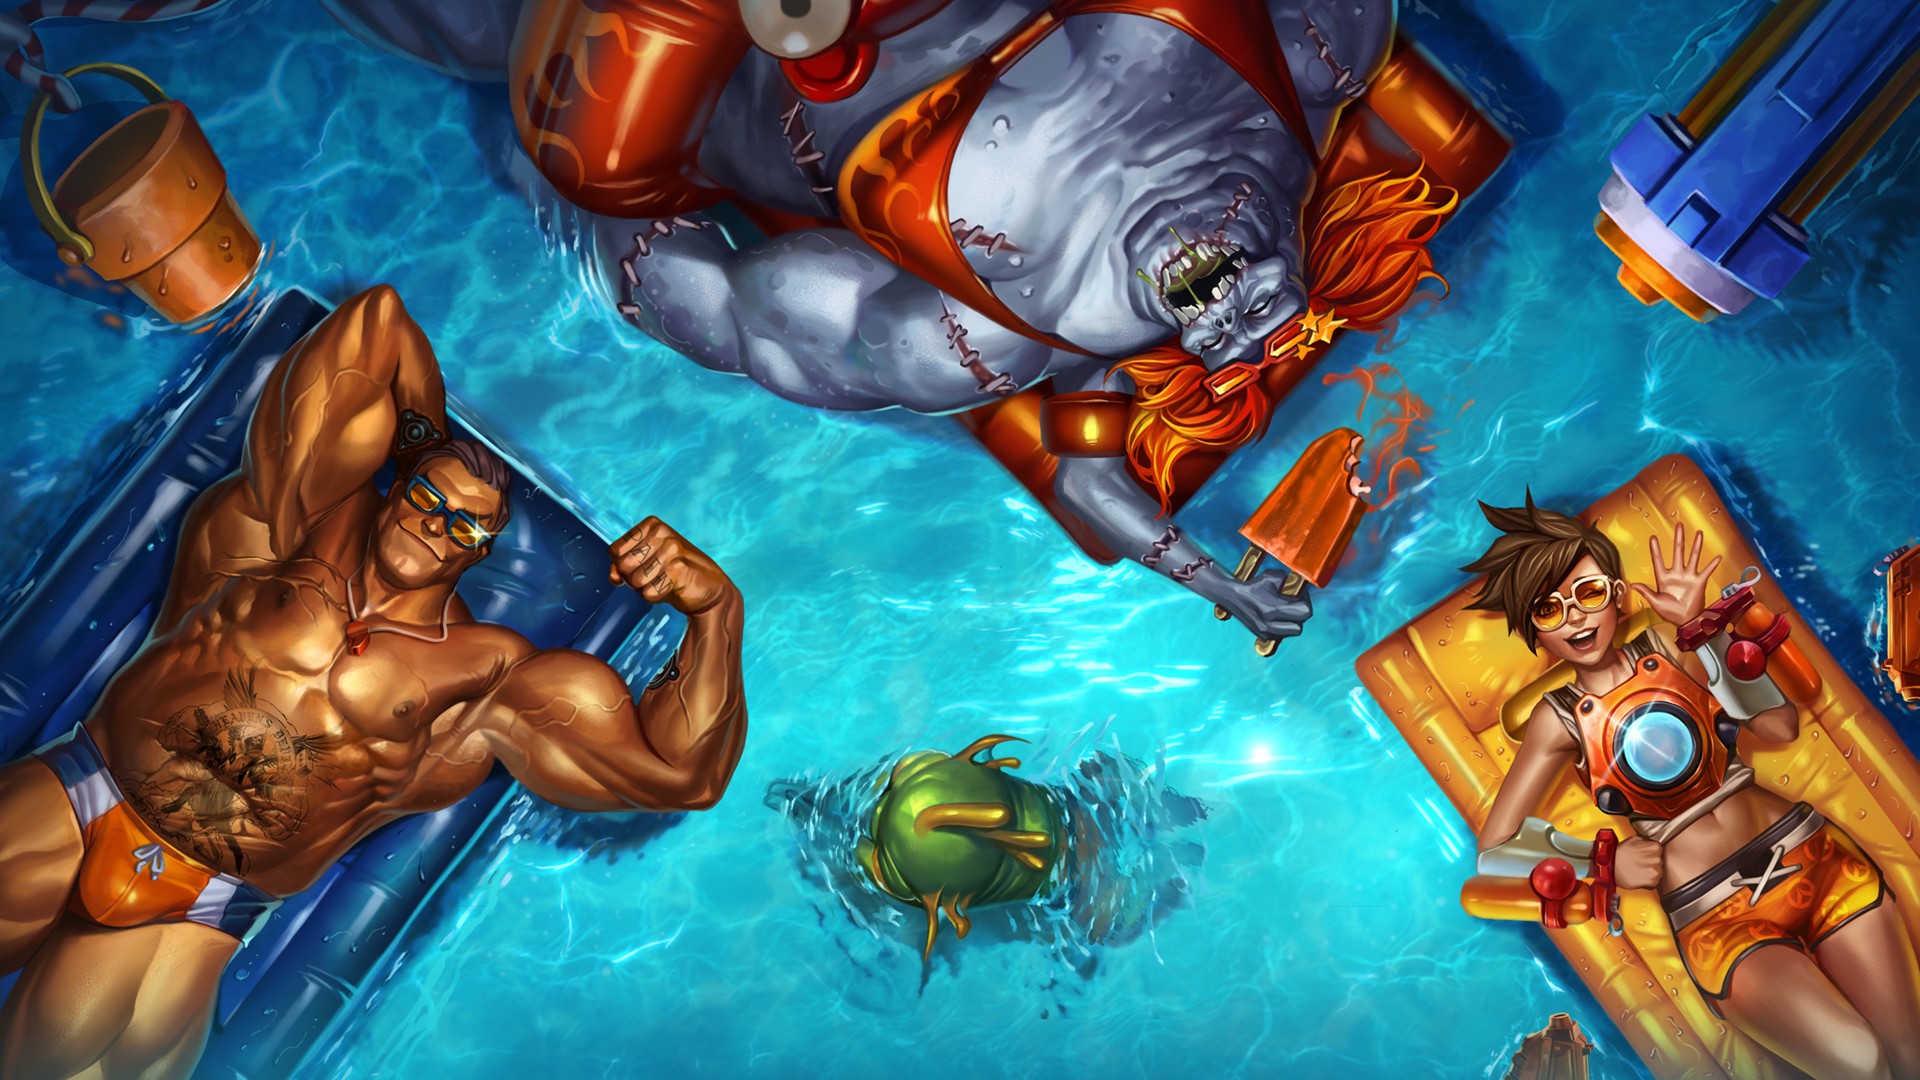 Tychus Findlay, Stitches, Murky, Thighs, Video games, Tracer (Overwatch), Swimming pool, Muscles, Artwork, Digital art, Starcraft II, Overwatch, Warcraft Wallpaper